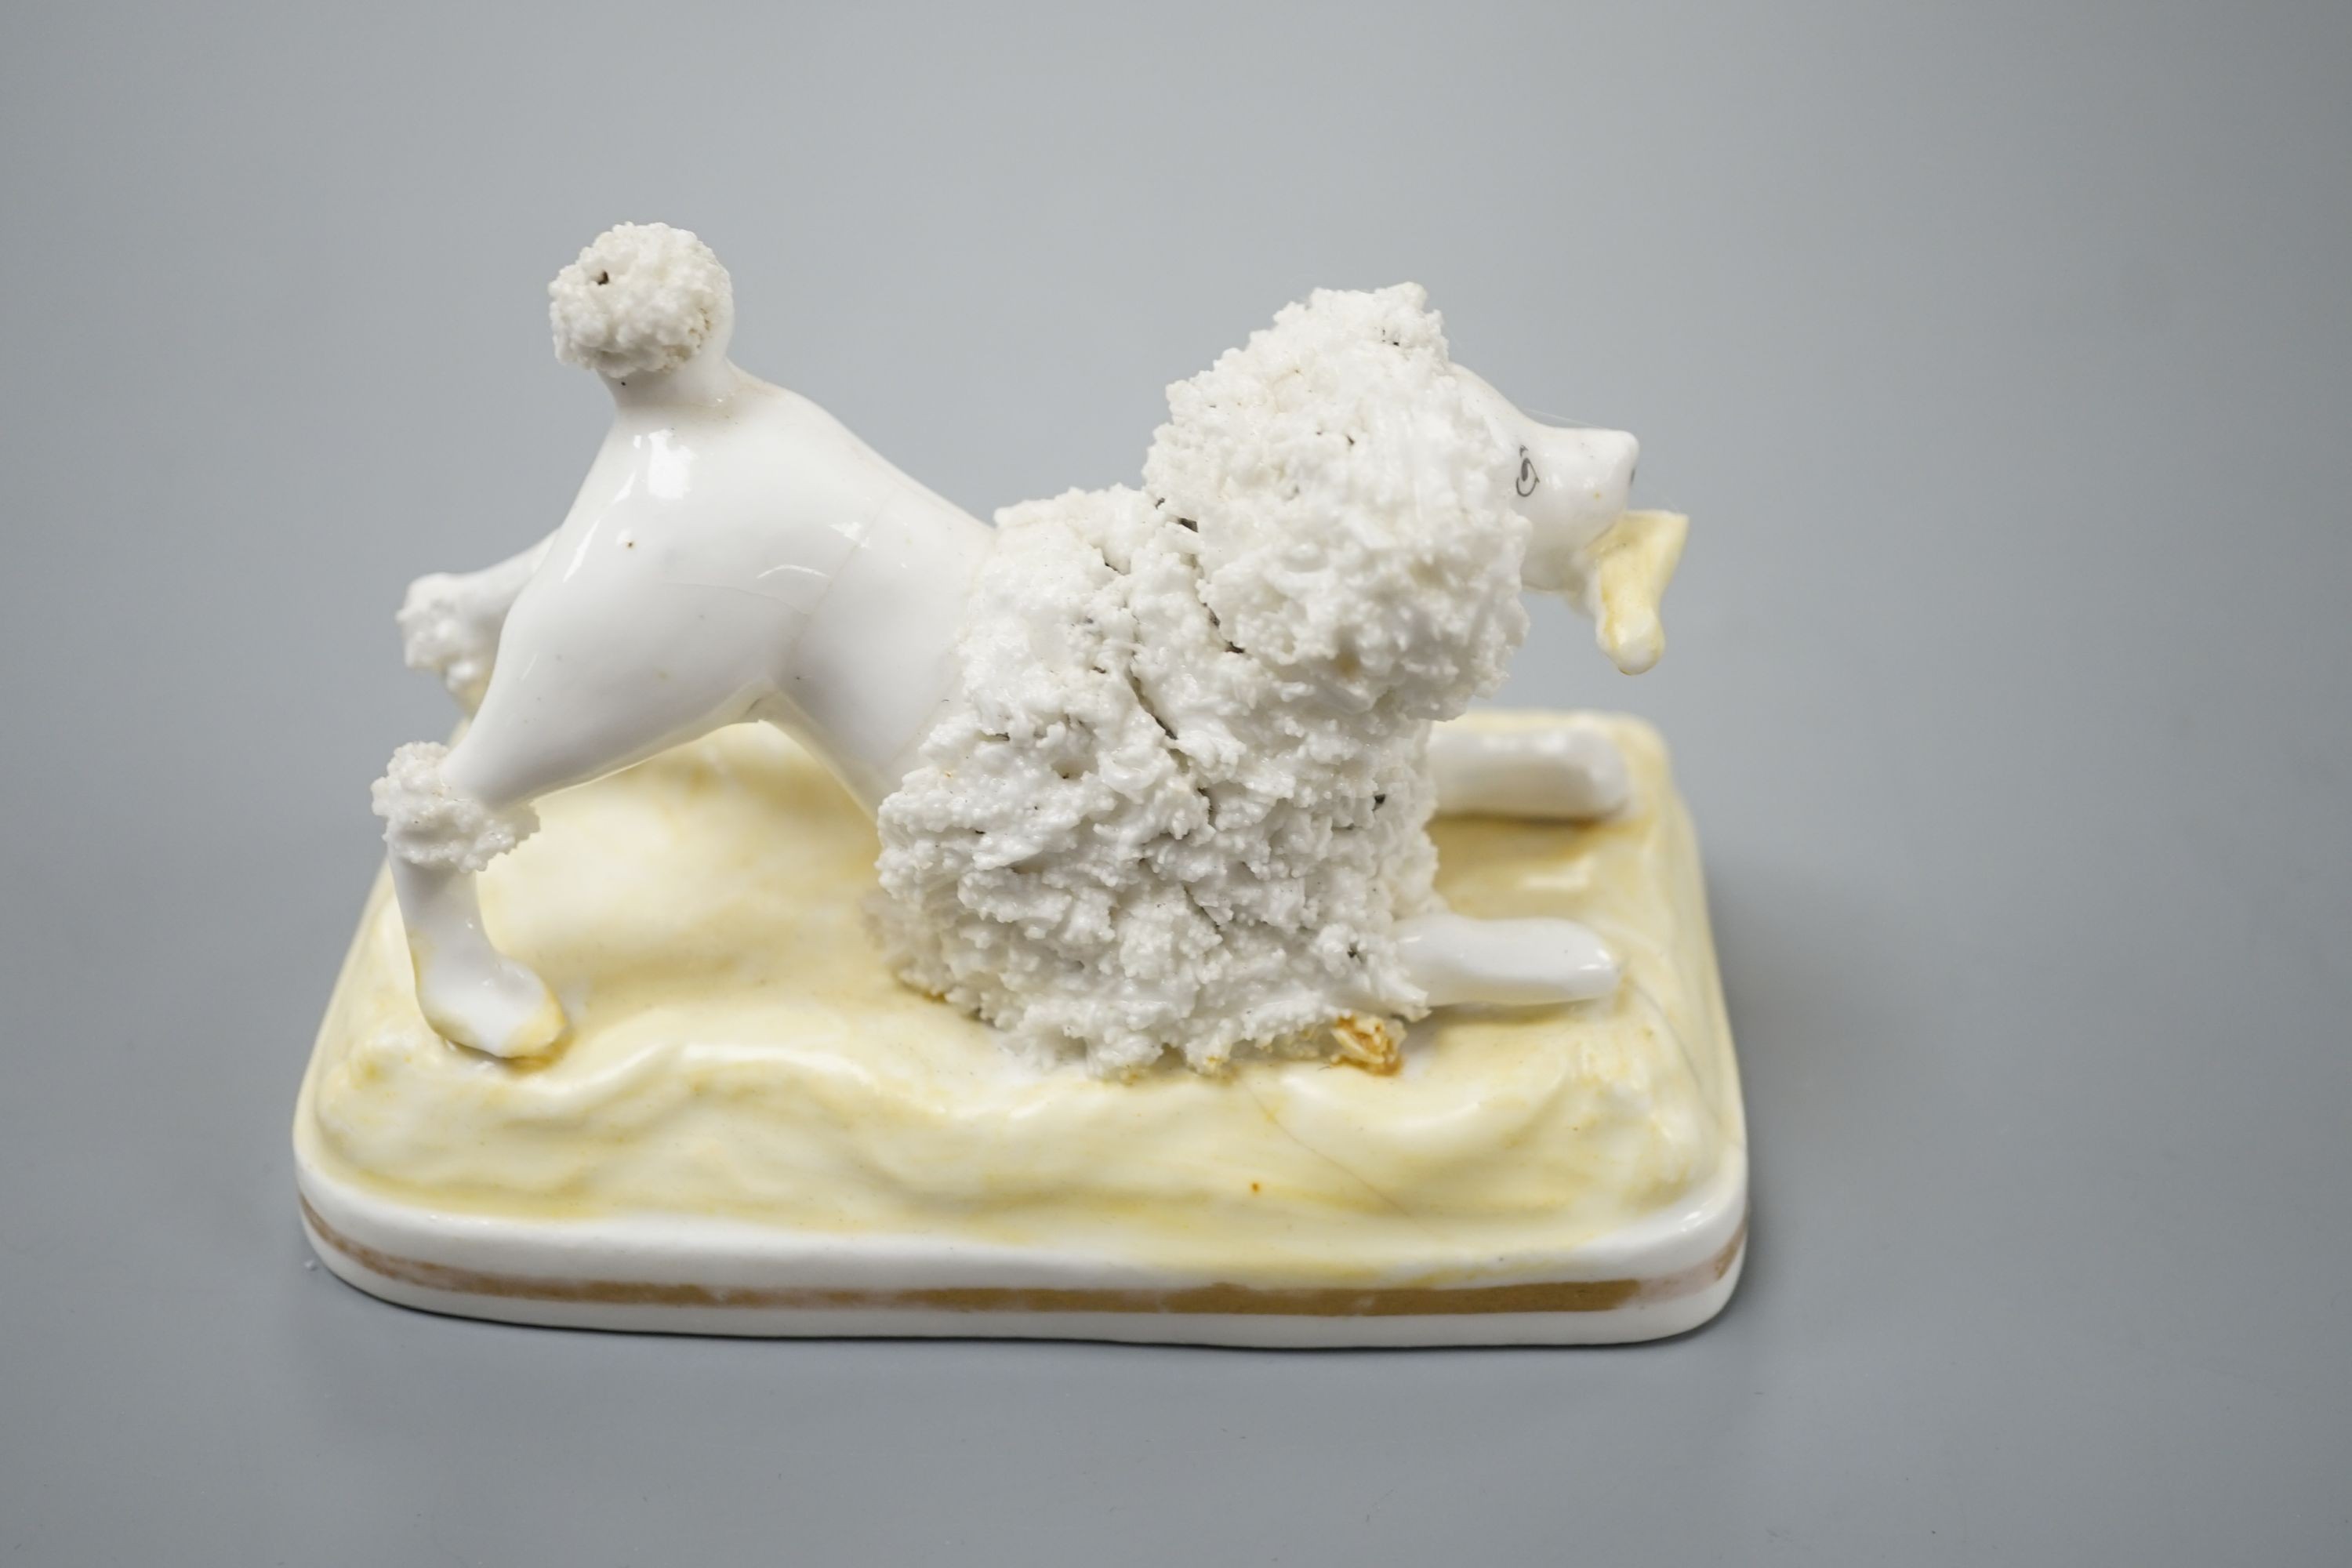 A Samuel Alcock model of a poodle grasping a bone, c.1835–50, 11.1 cm long, Cf. Dennis G.Rice Dogs in English porcelain, colour plate 64., Provenance: Dennis G.Rice collection